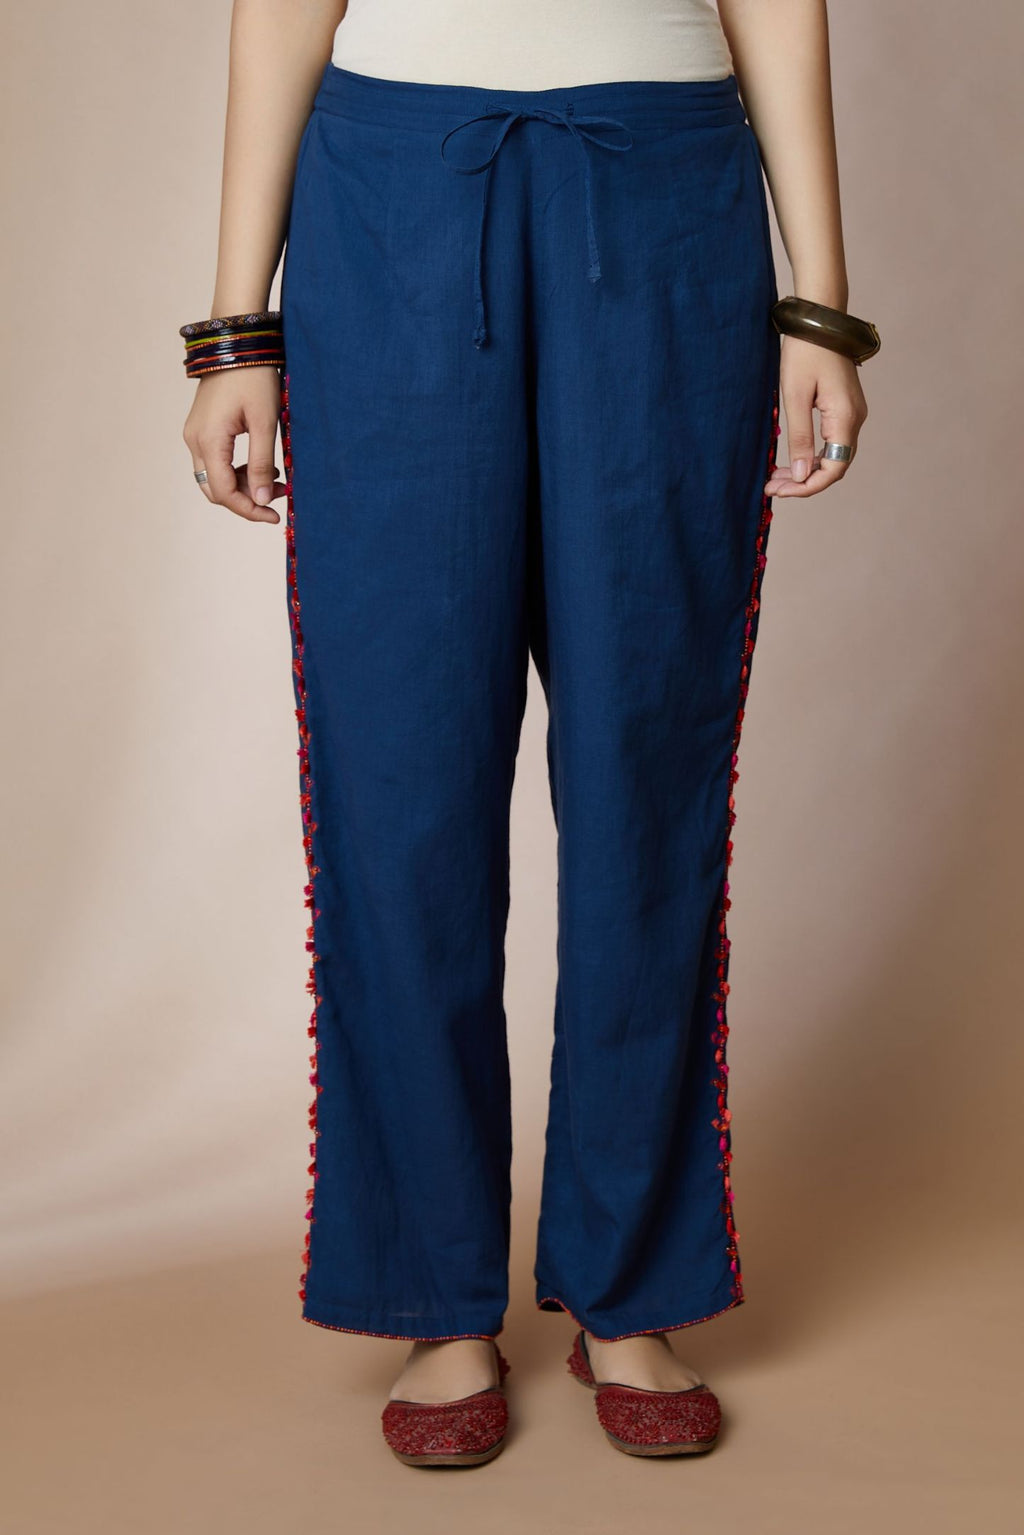 Indigo blue cotton straight pants with bird and tassel embroidery at sides